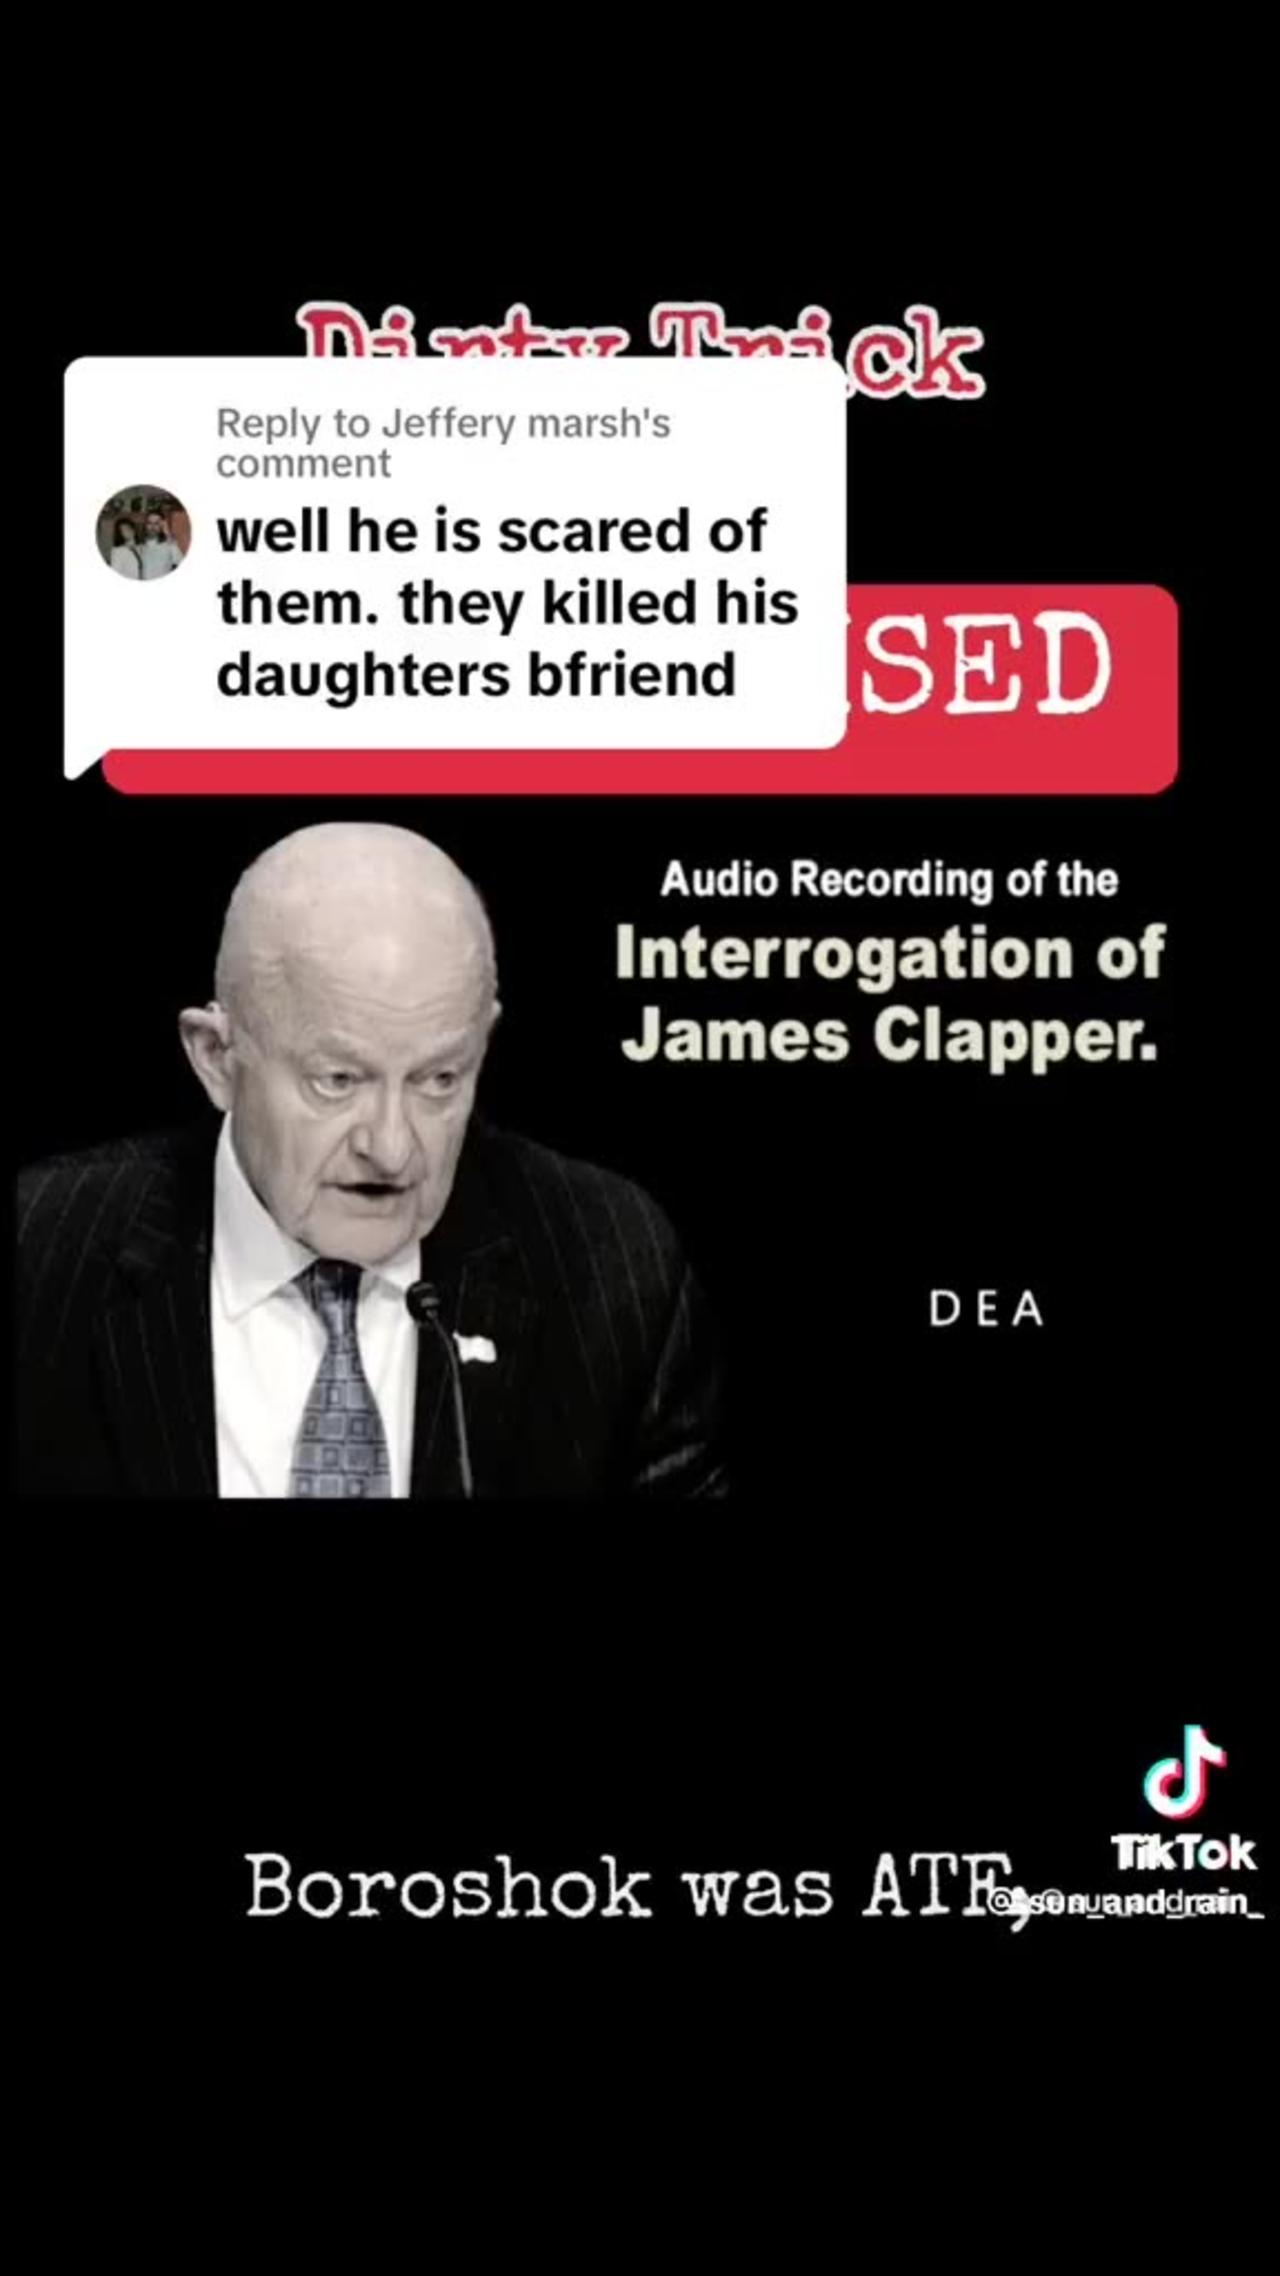 AUDIO RECORDING OF THE INTERROGATION OF JAMES CLAPPER